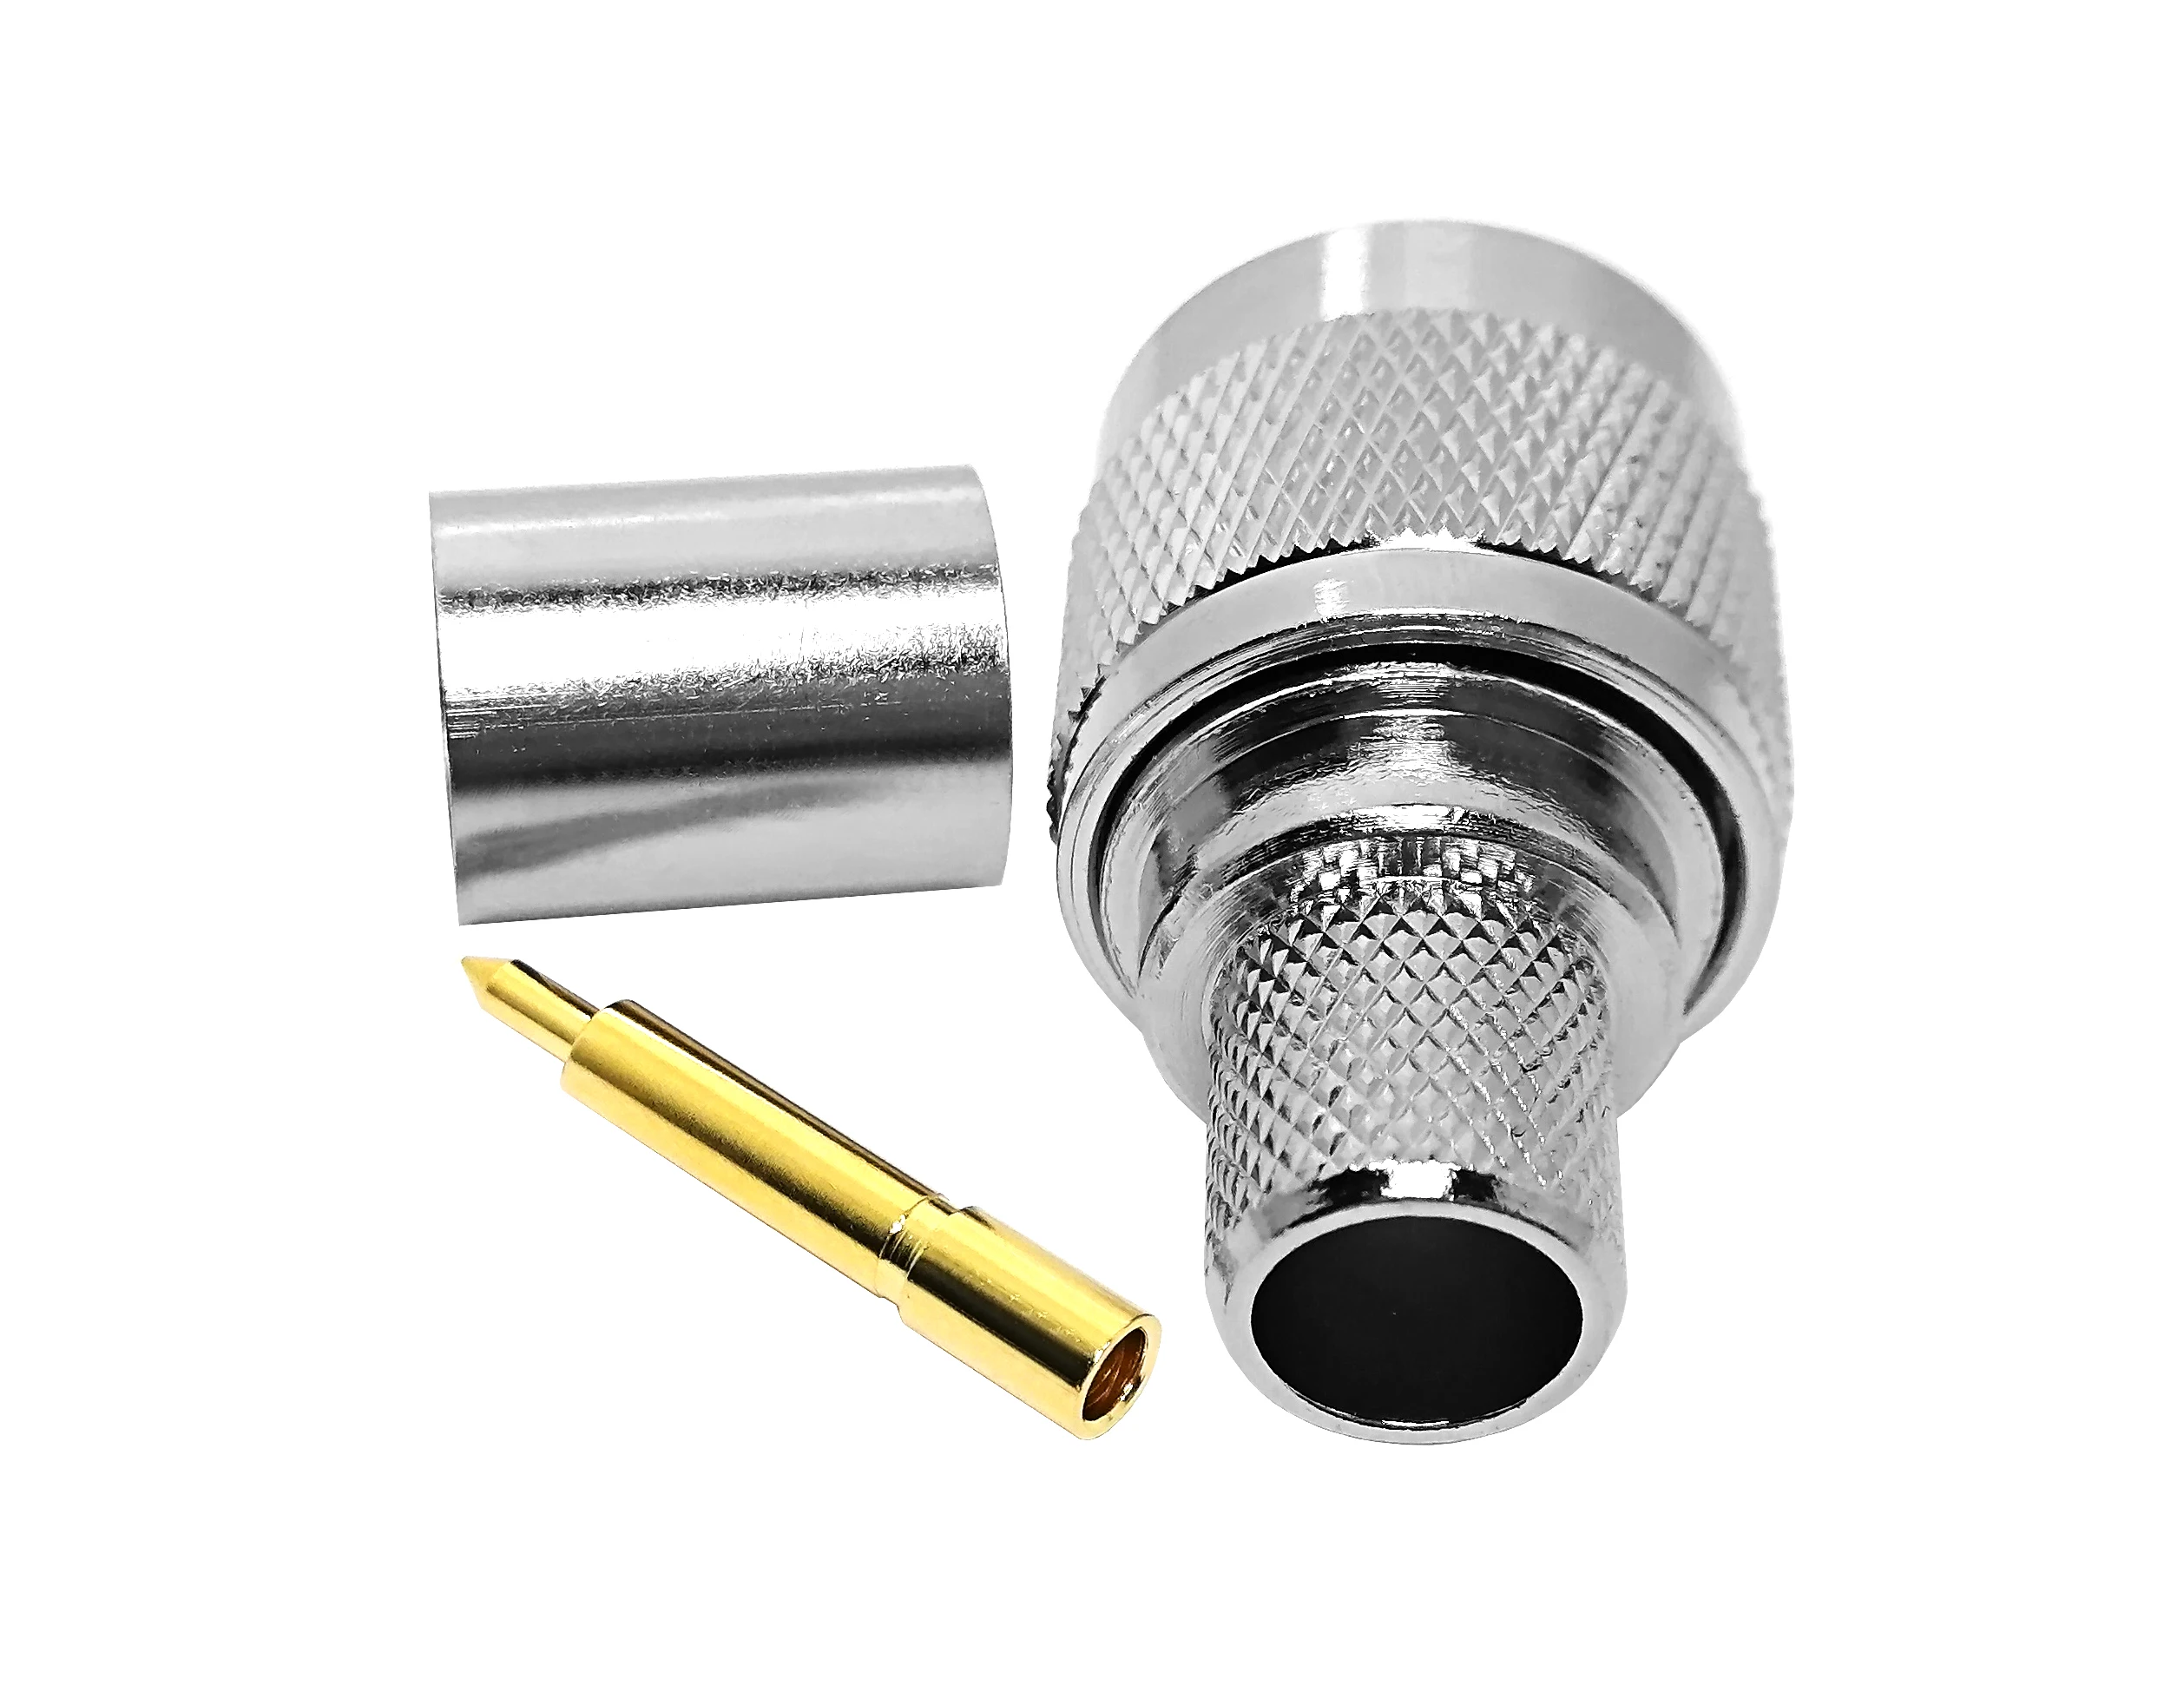 Brass Material Plug Male N Type Crimp Connector For LMR400 LMR-400 N LMR 400 Male Connector details